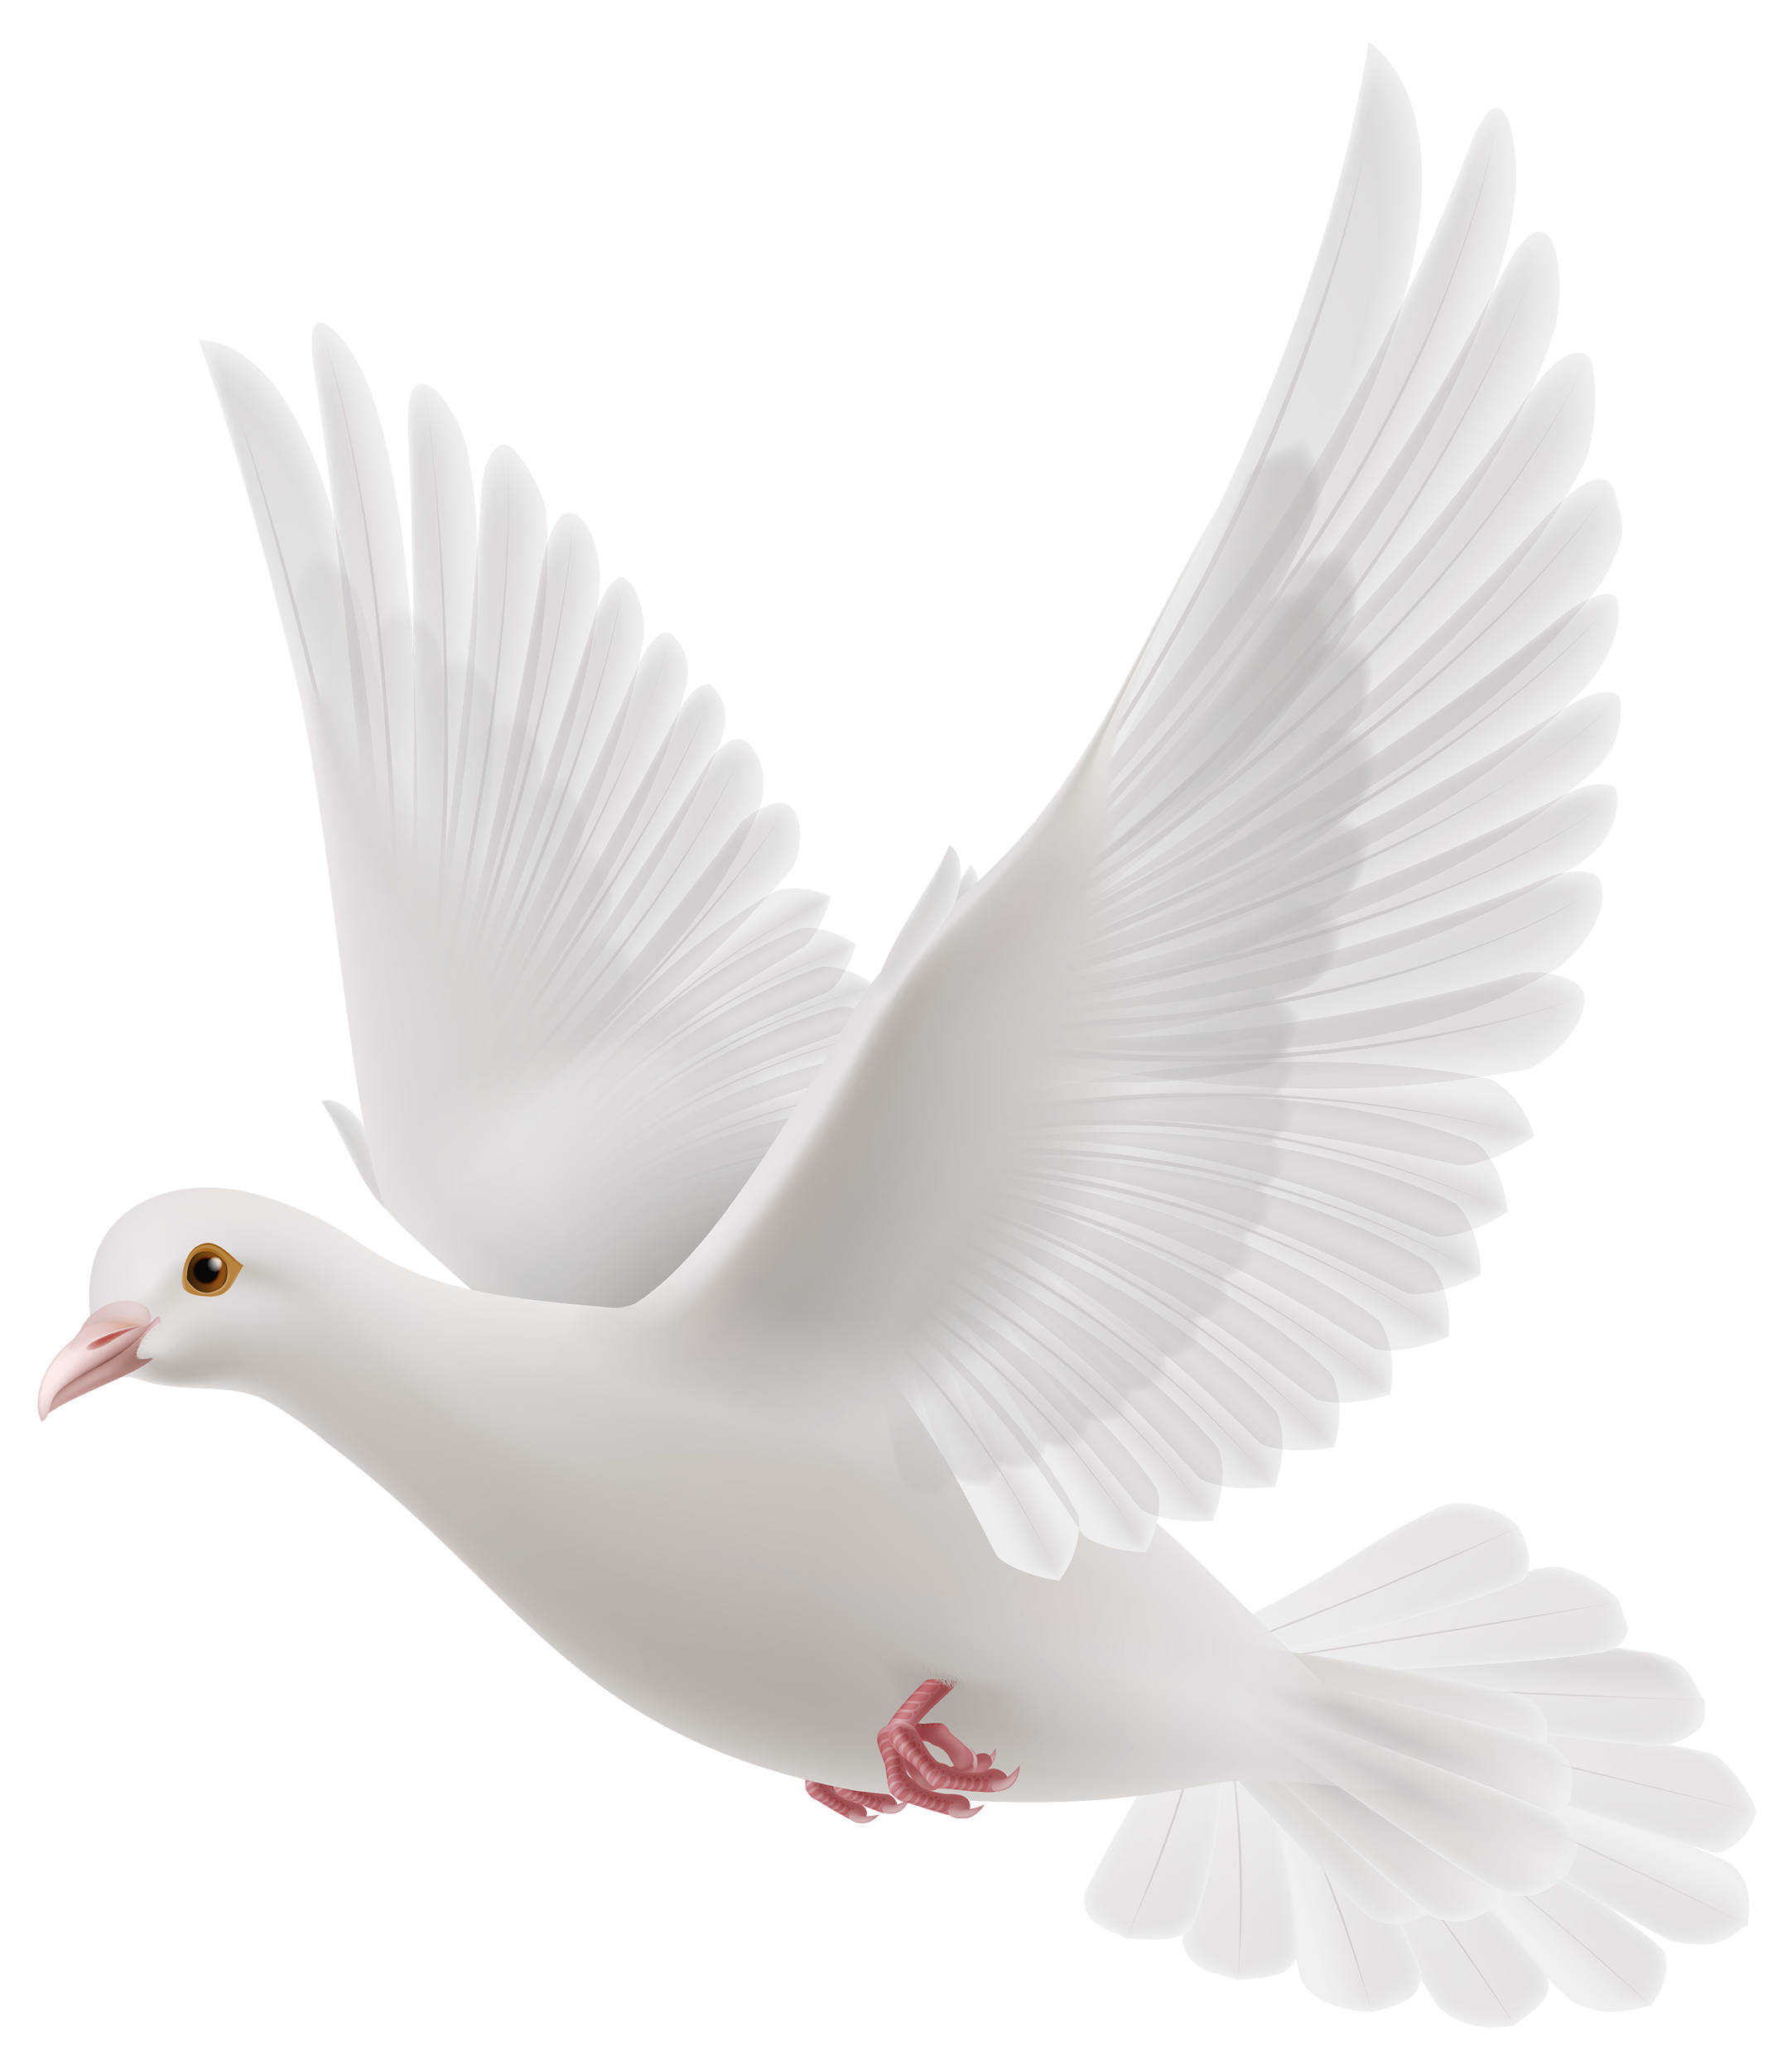 Pigeon clipart purity. Look i am sending